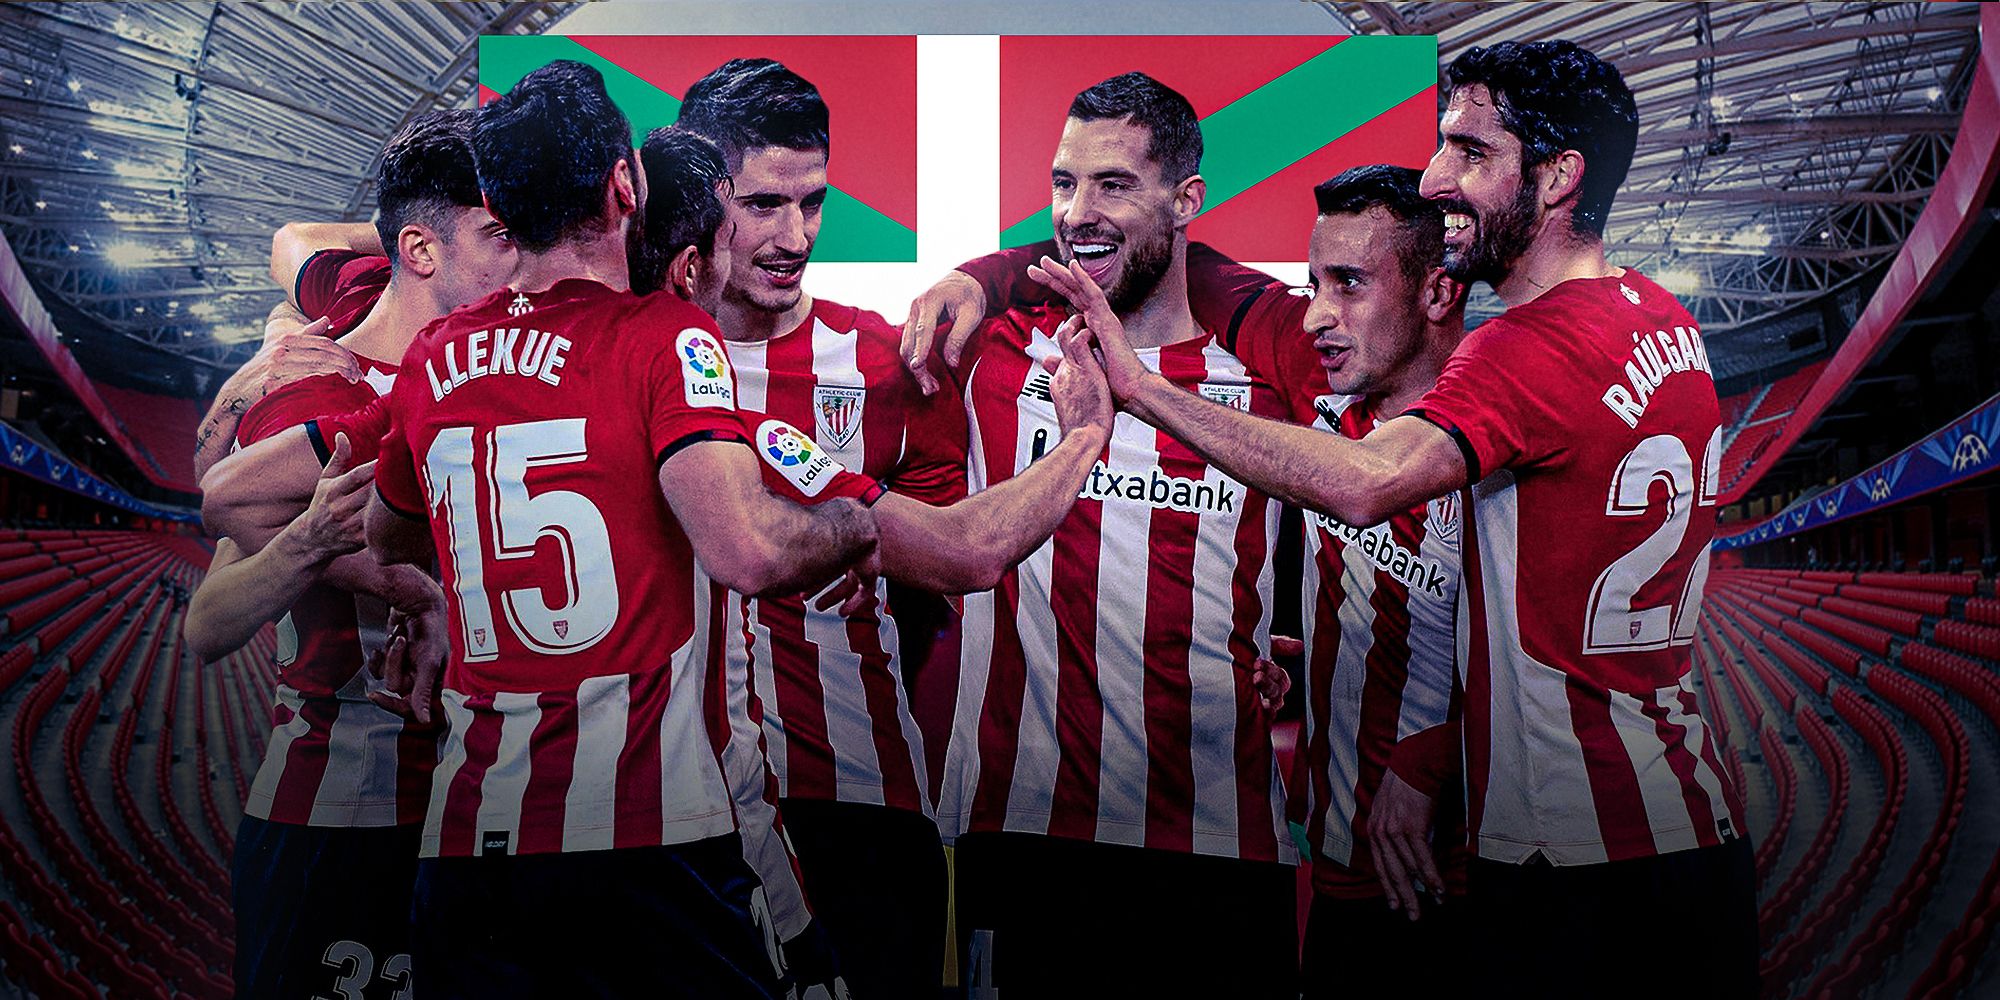 Collage featuring Athletic Bilbao players with the Basque flag.